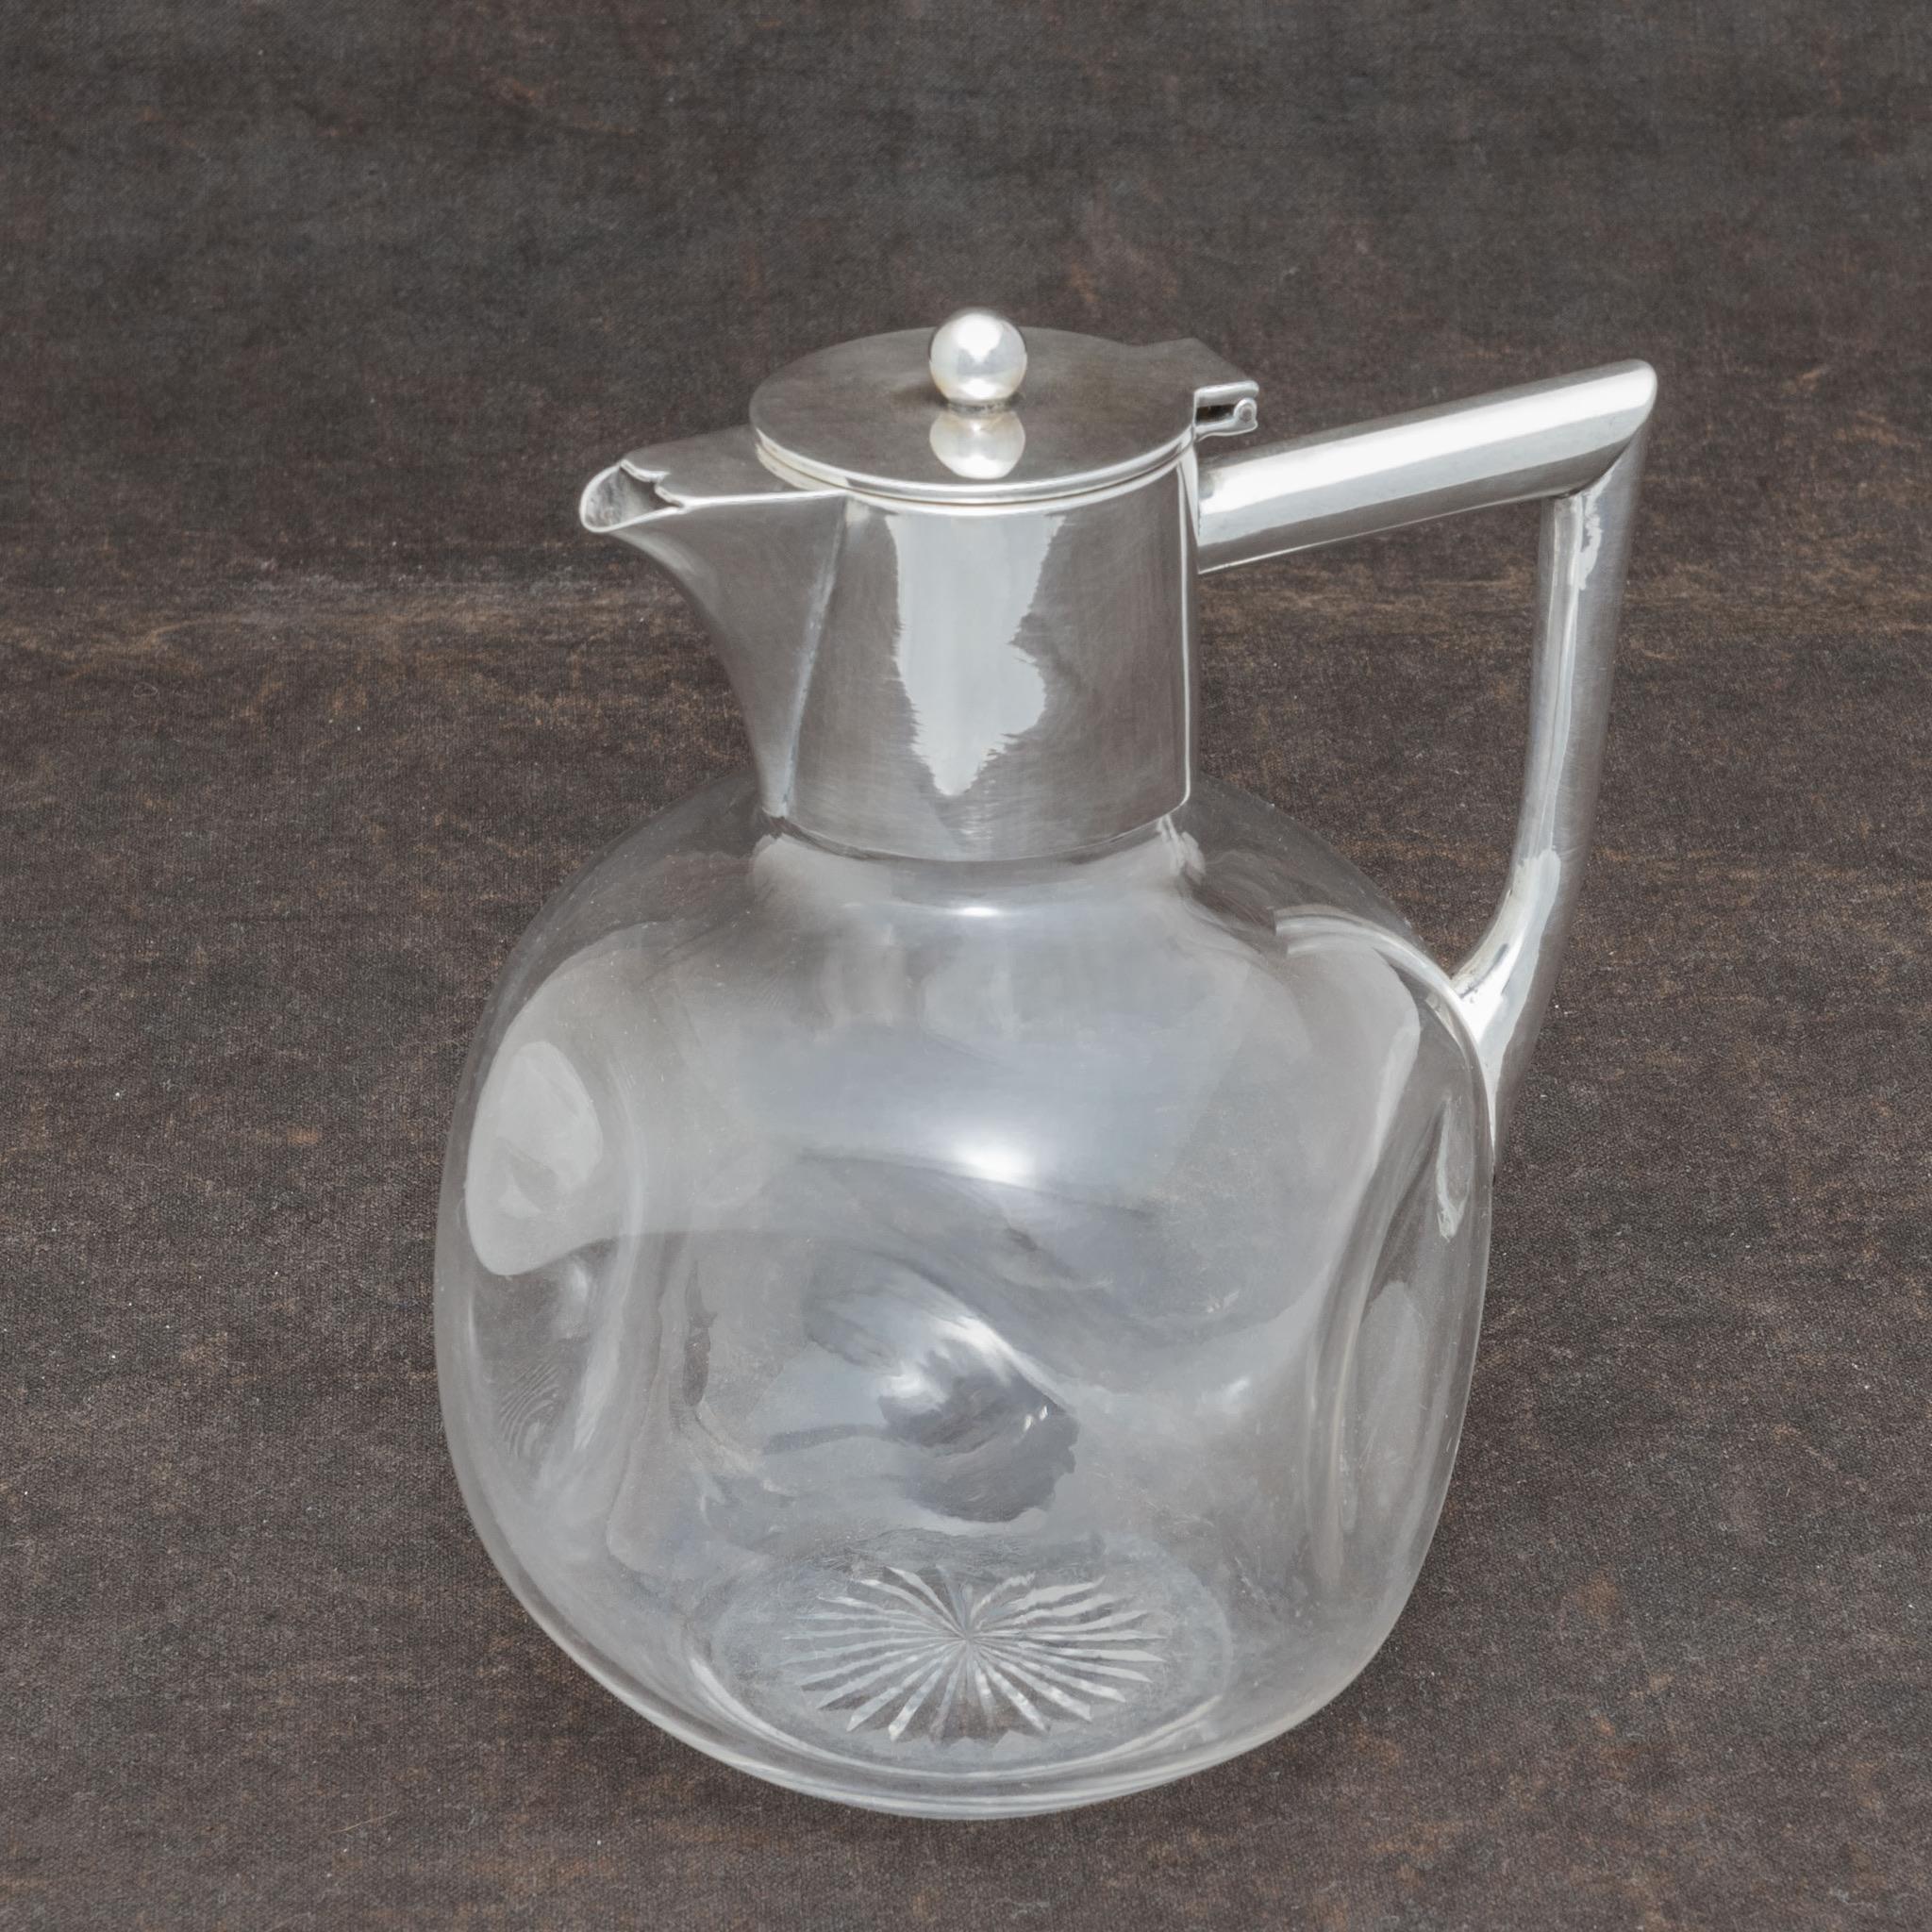 Stylish late nineteenth century claret jug with a hand blown spherical glass body incorporating a dimpled design. The silver handle and top combination are hallmarked Birmingham 1898. Deceptive in that, although modest looking in size, it will hold